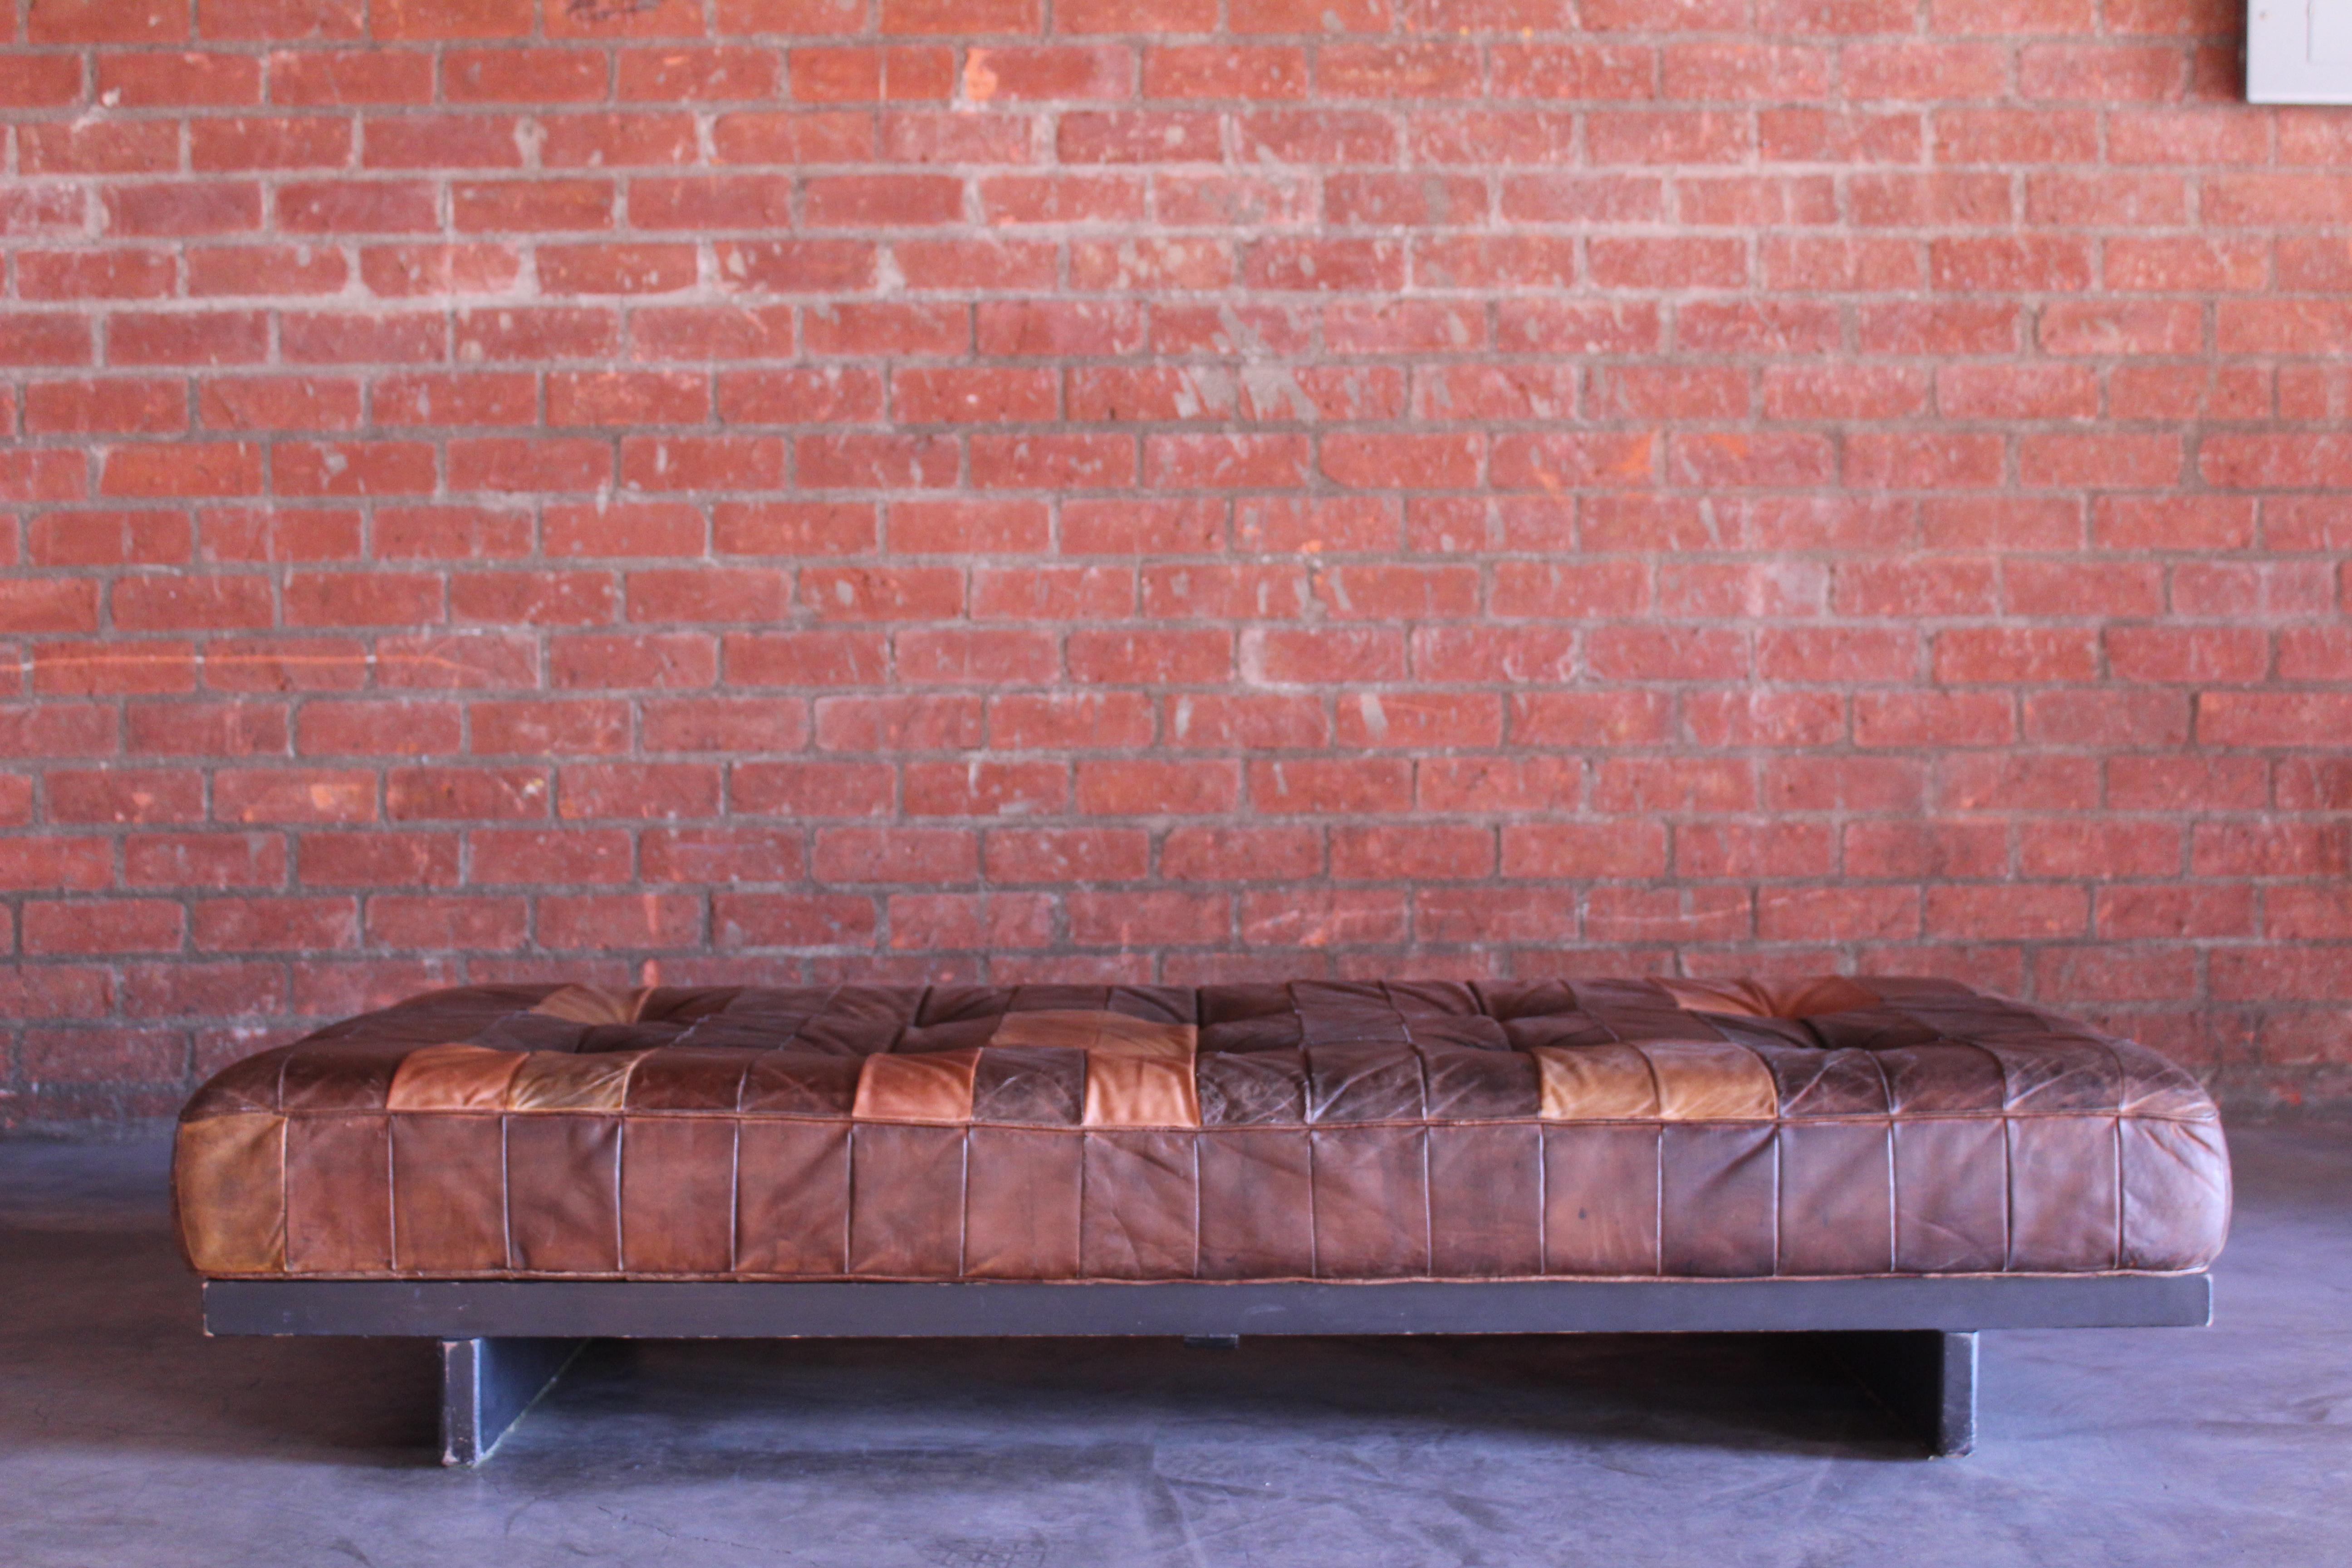 Vintage patchwork leather daybed by De Sede, Switzerland, 1960s. Sits on an ebonoized walnut wood base. In overall good original condition with age appropriate wear. The leather has a nice patina, the wood base shows some wear on the finish.